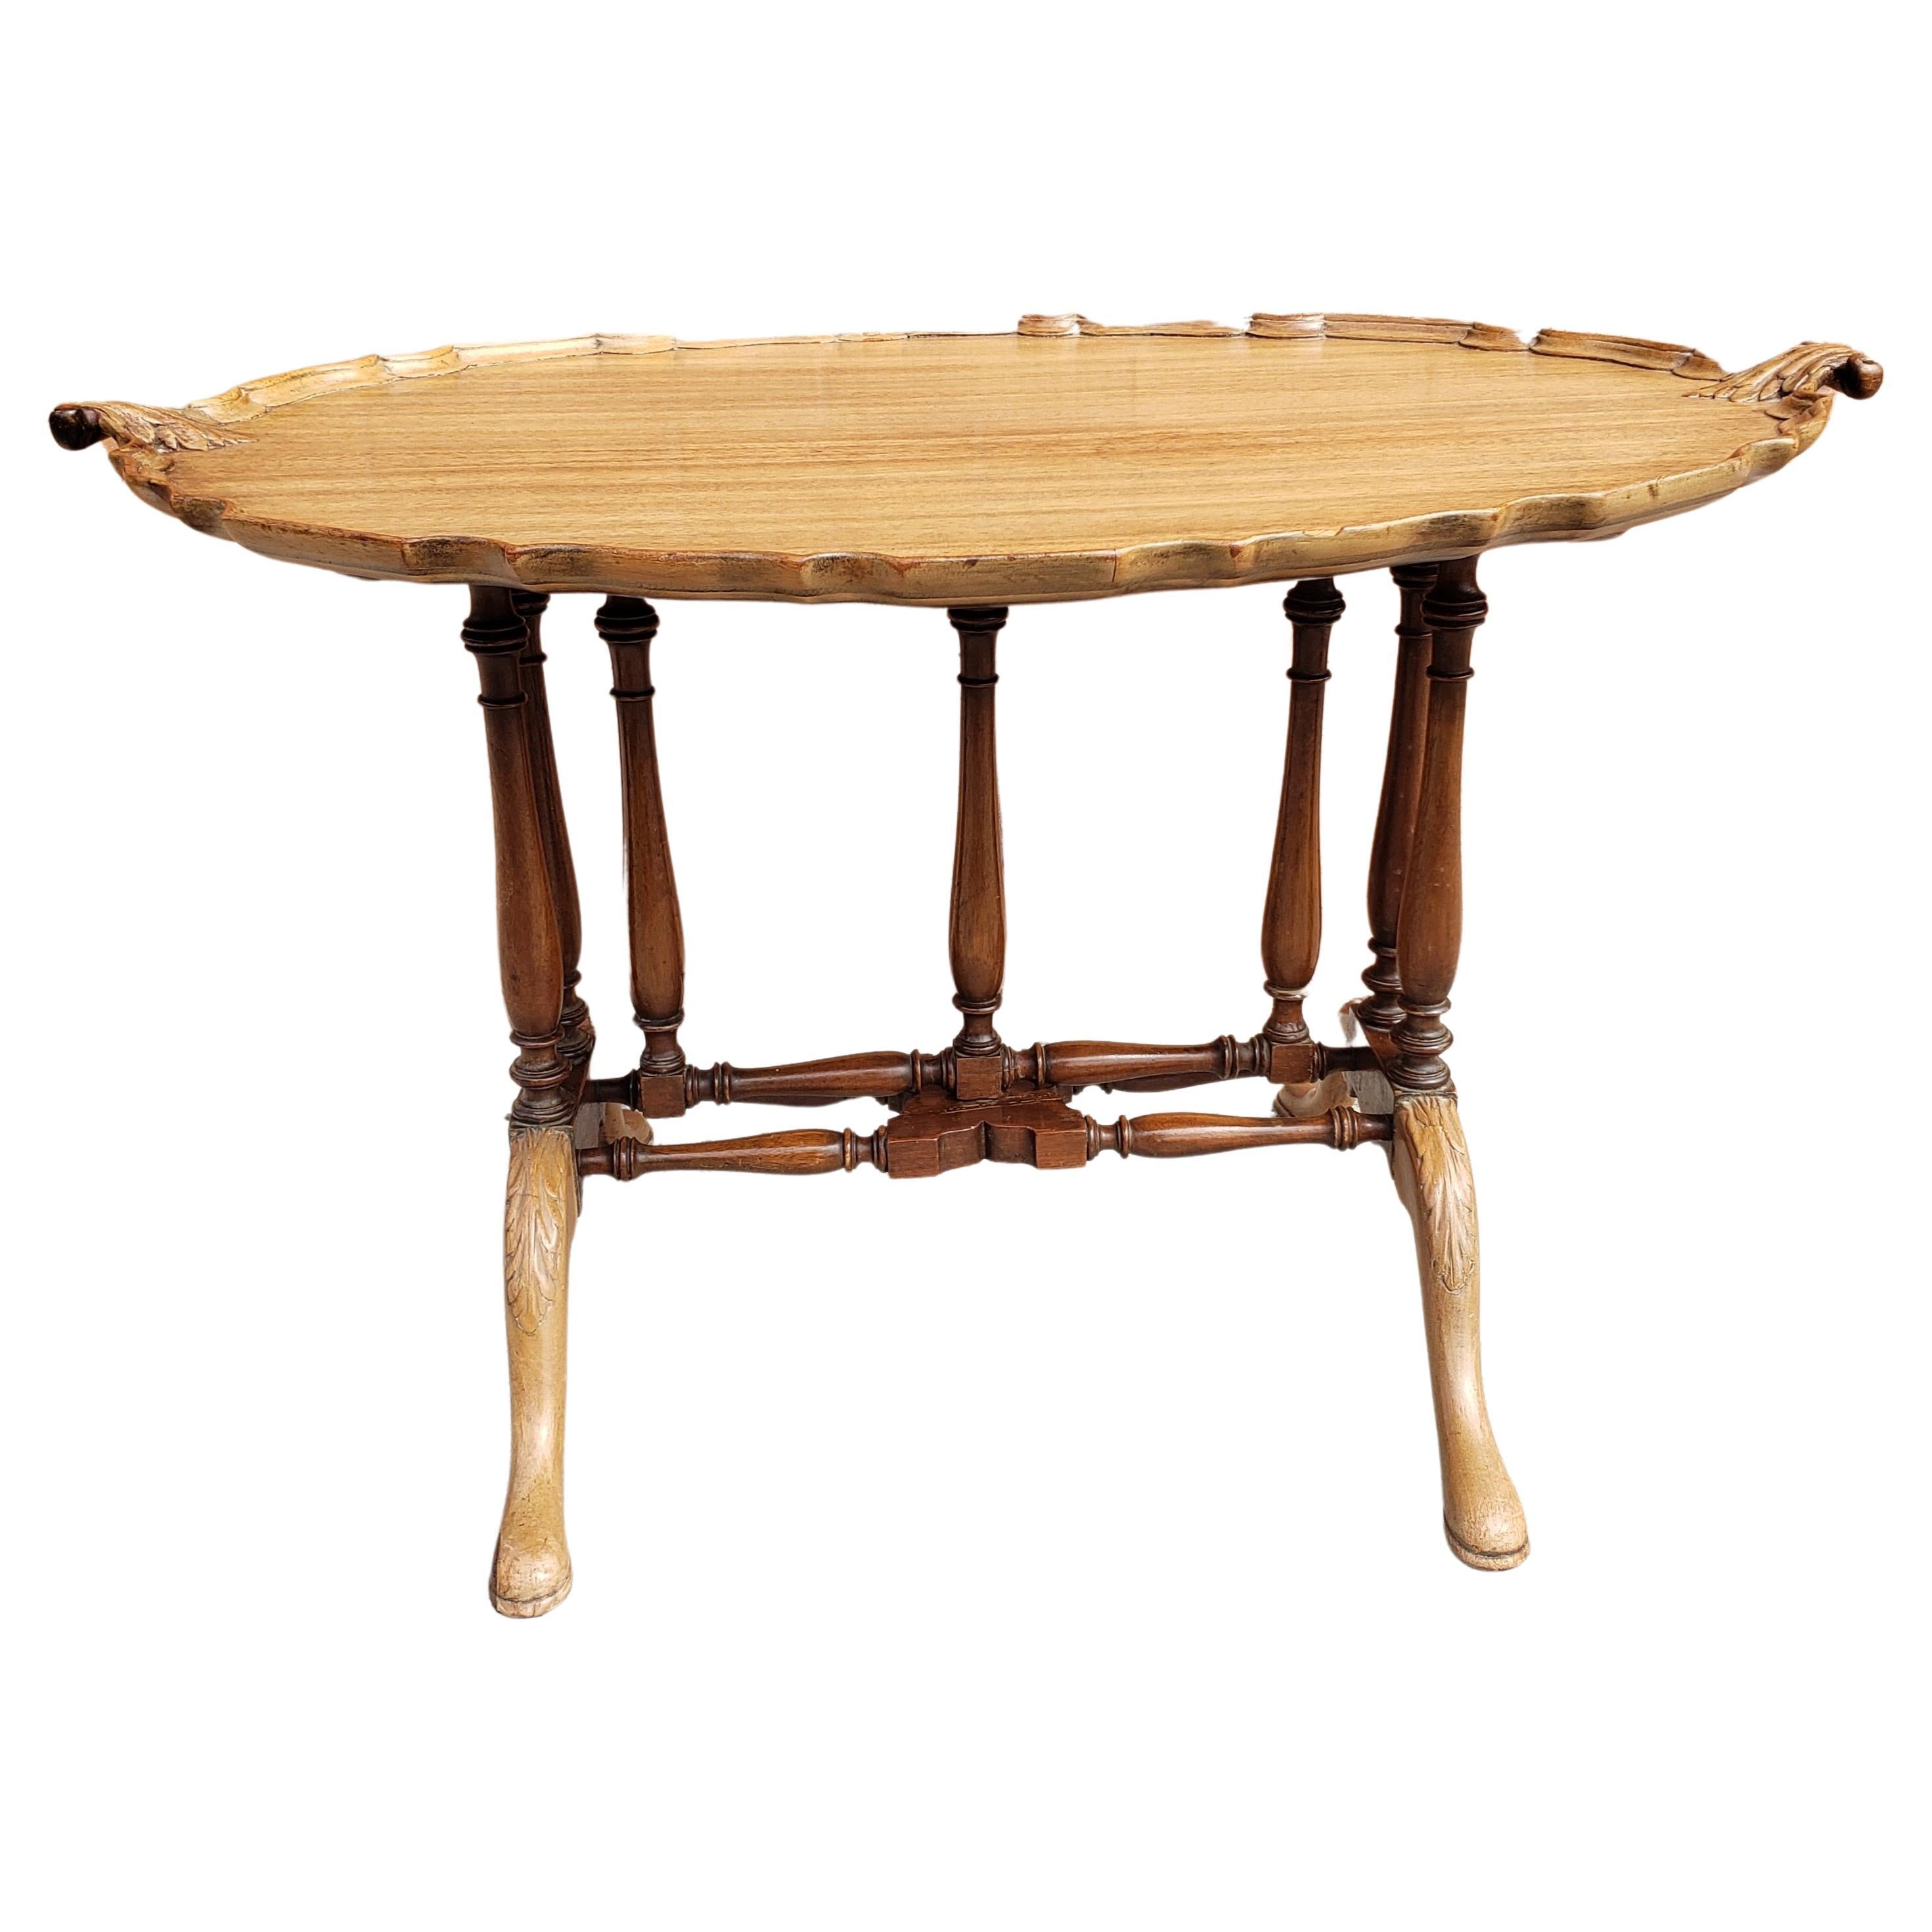 For your consideration is this very unique Pale Sipo Mahogany oval tilt-top pie crust tray tea table in the Chippendale style.
Measures 32.25